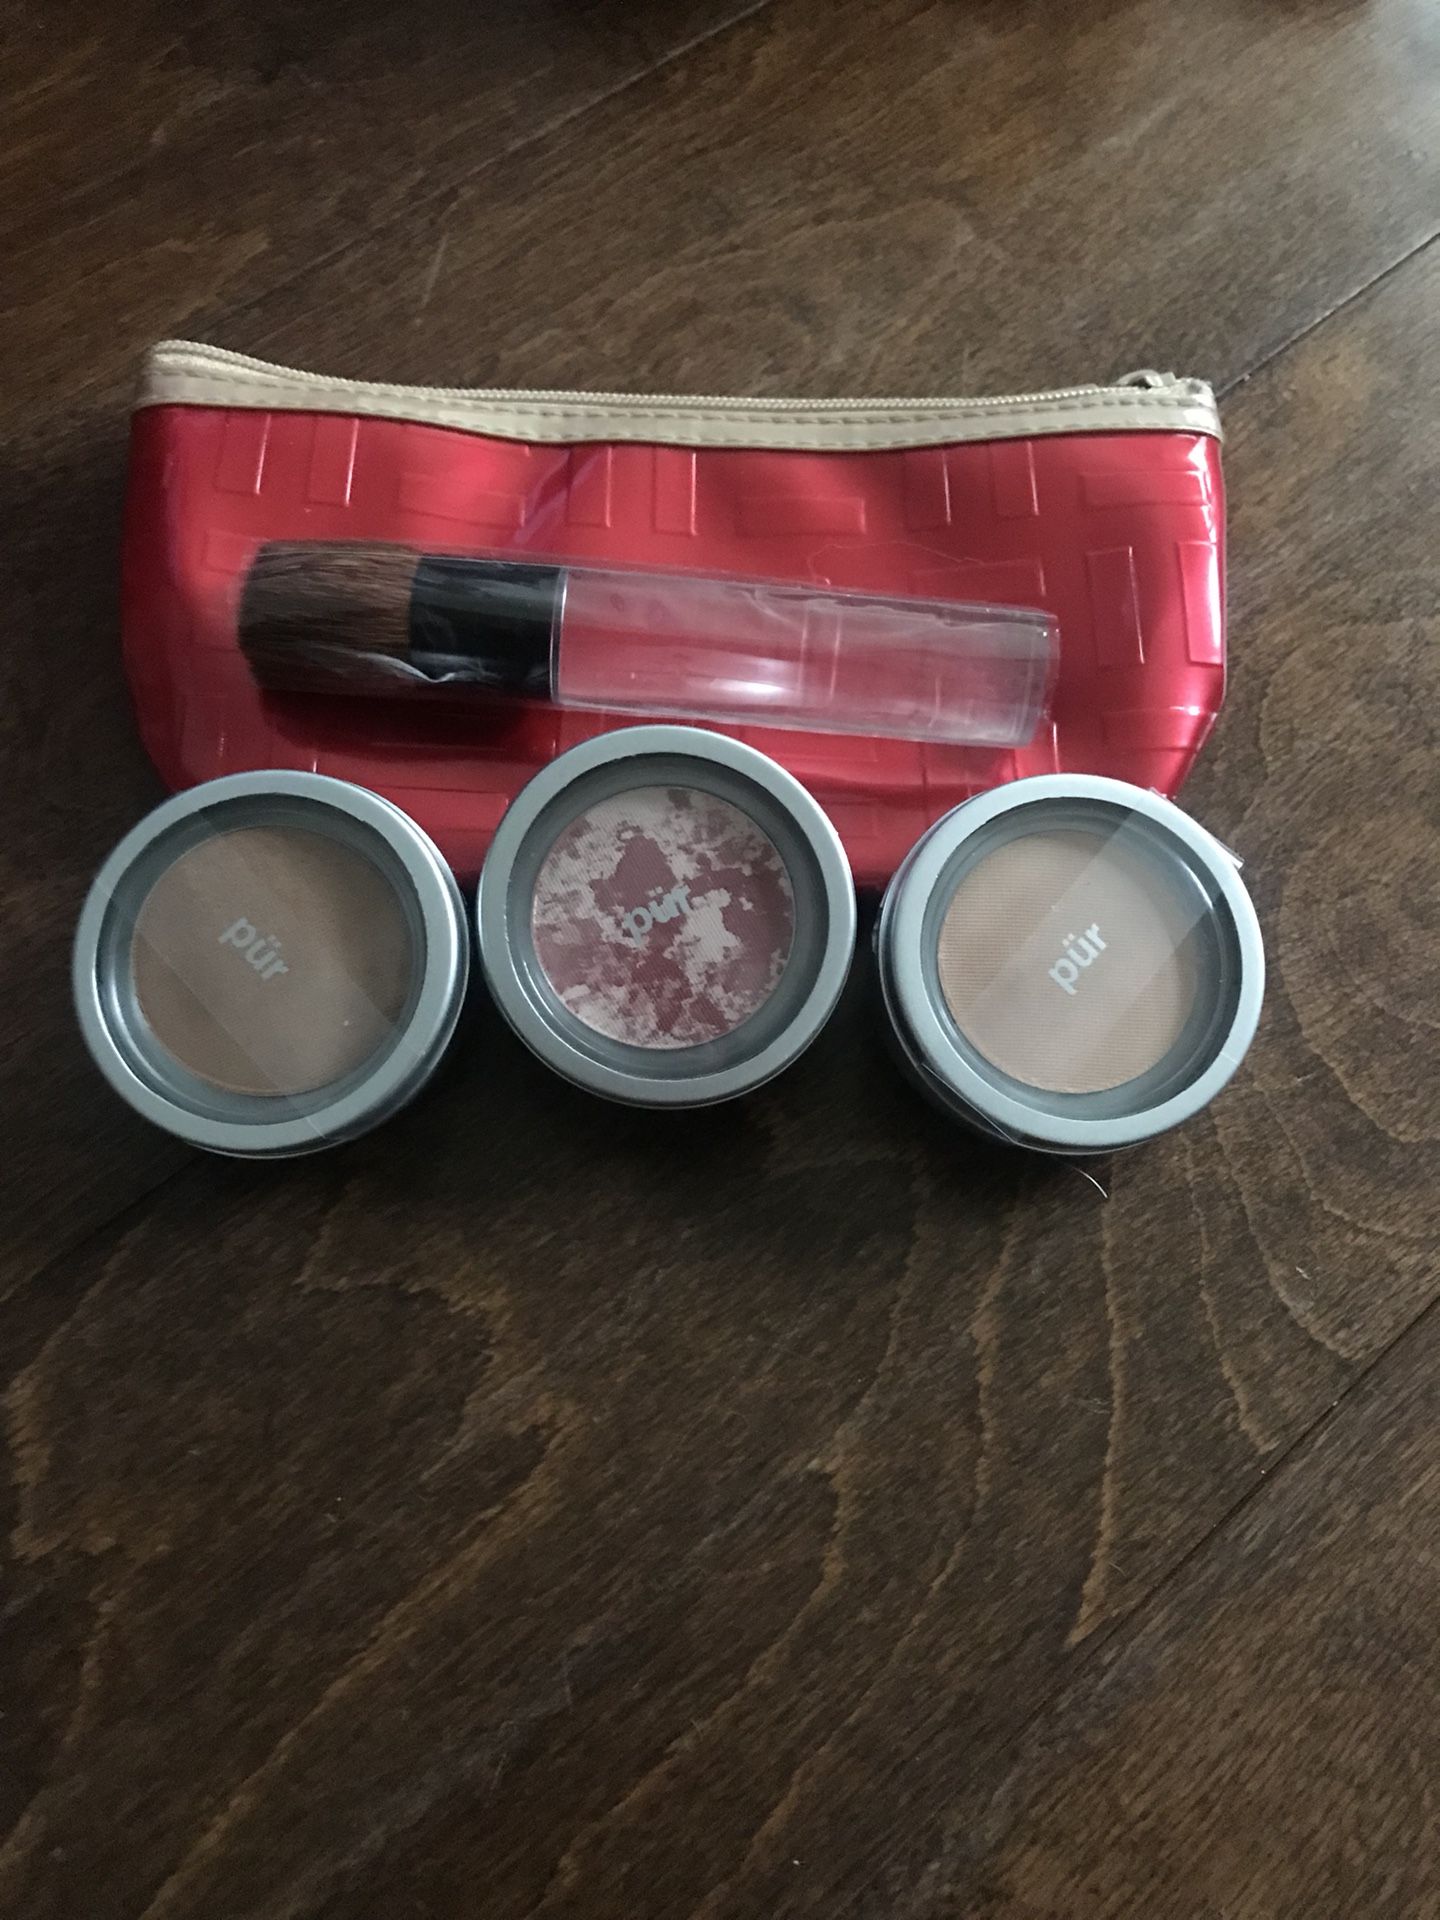 New PUR mineral makeup,brush,and case